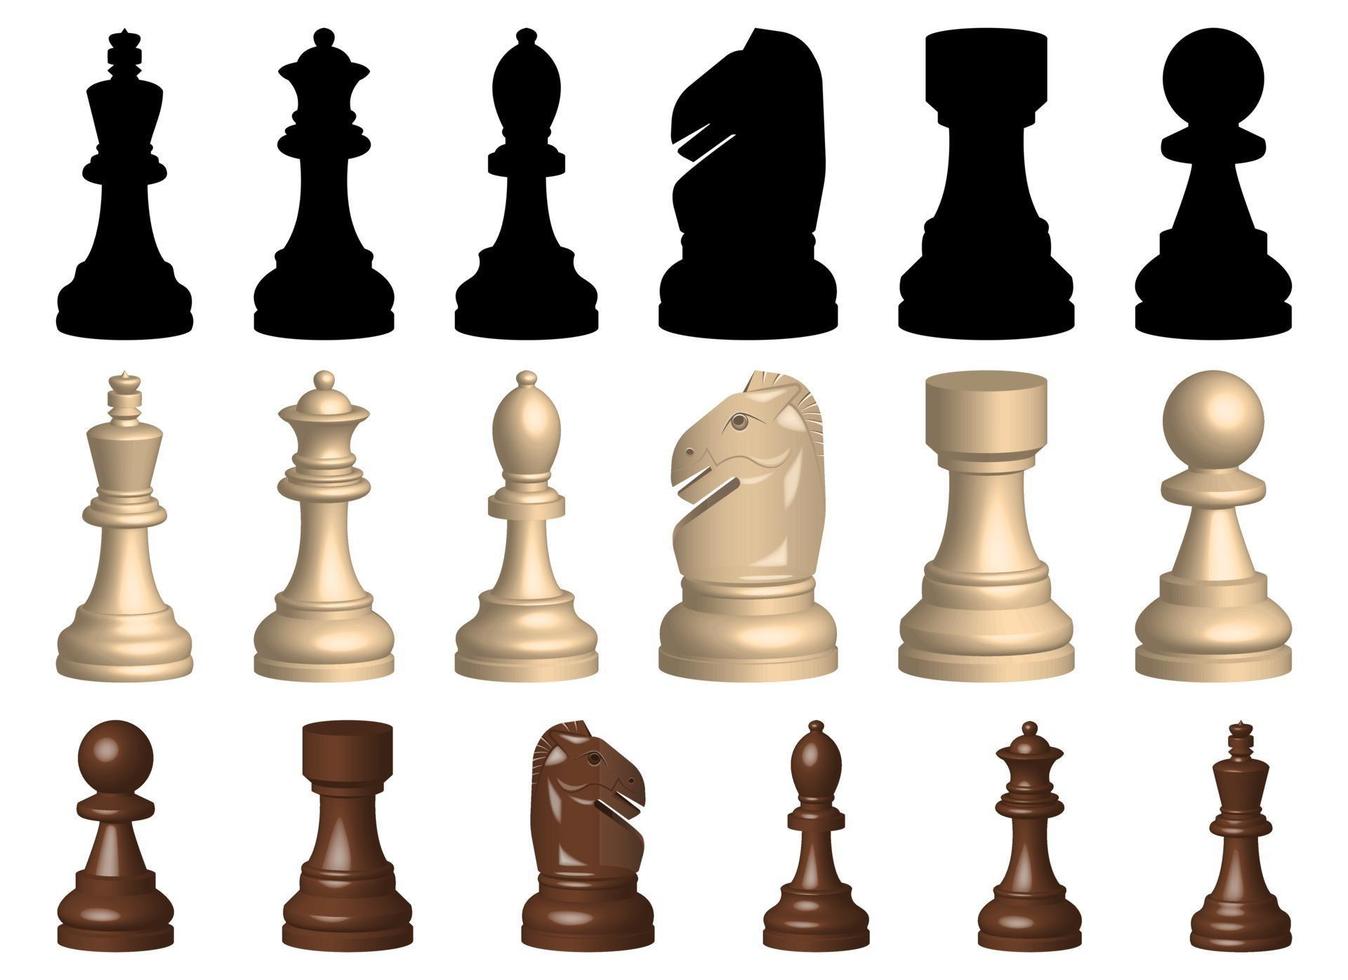 Chess game pieces vector design illustration set isolated on white background